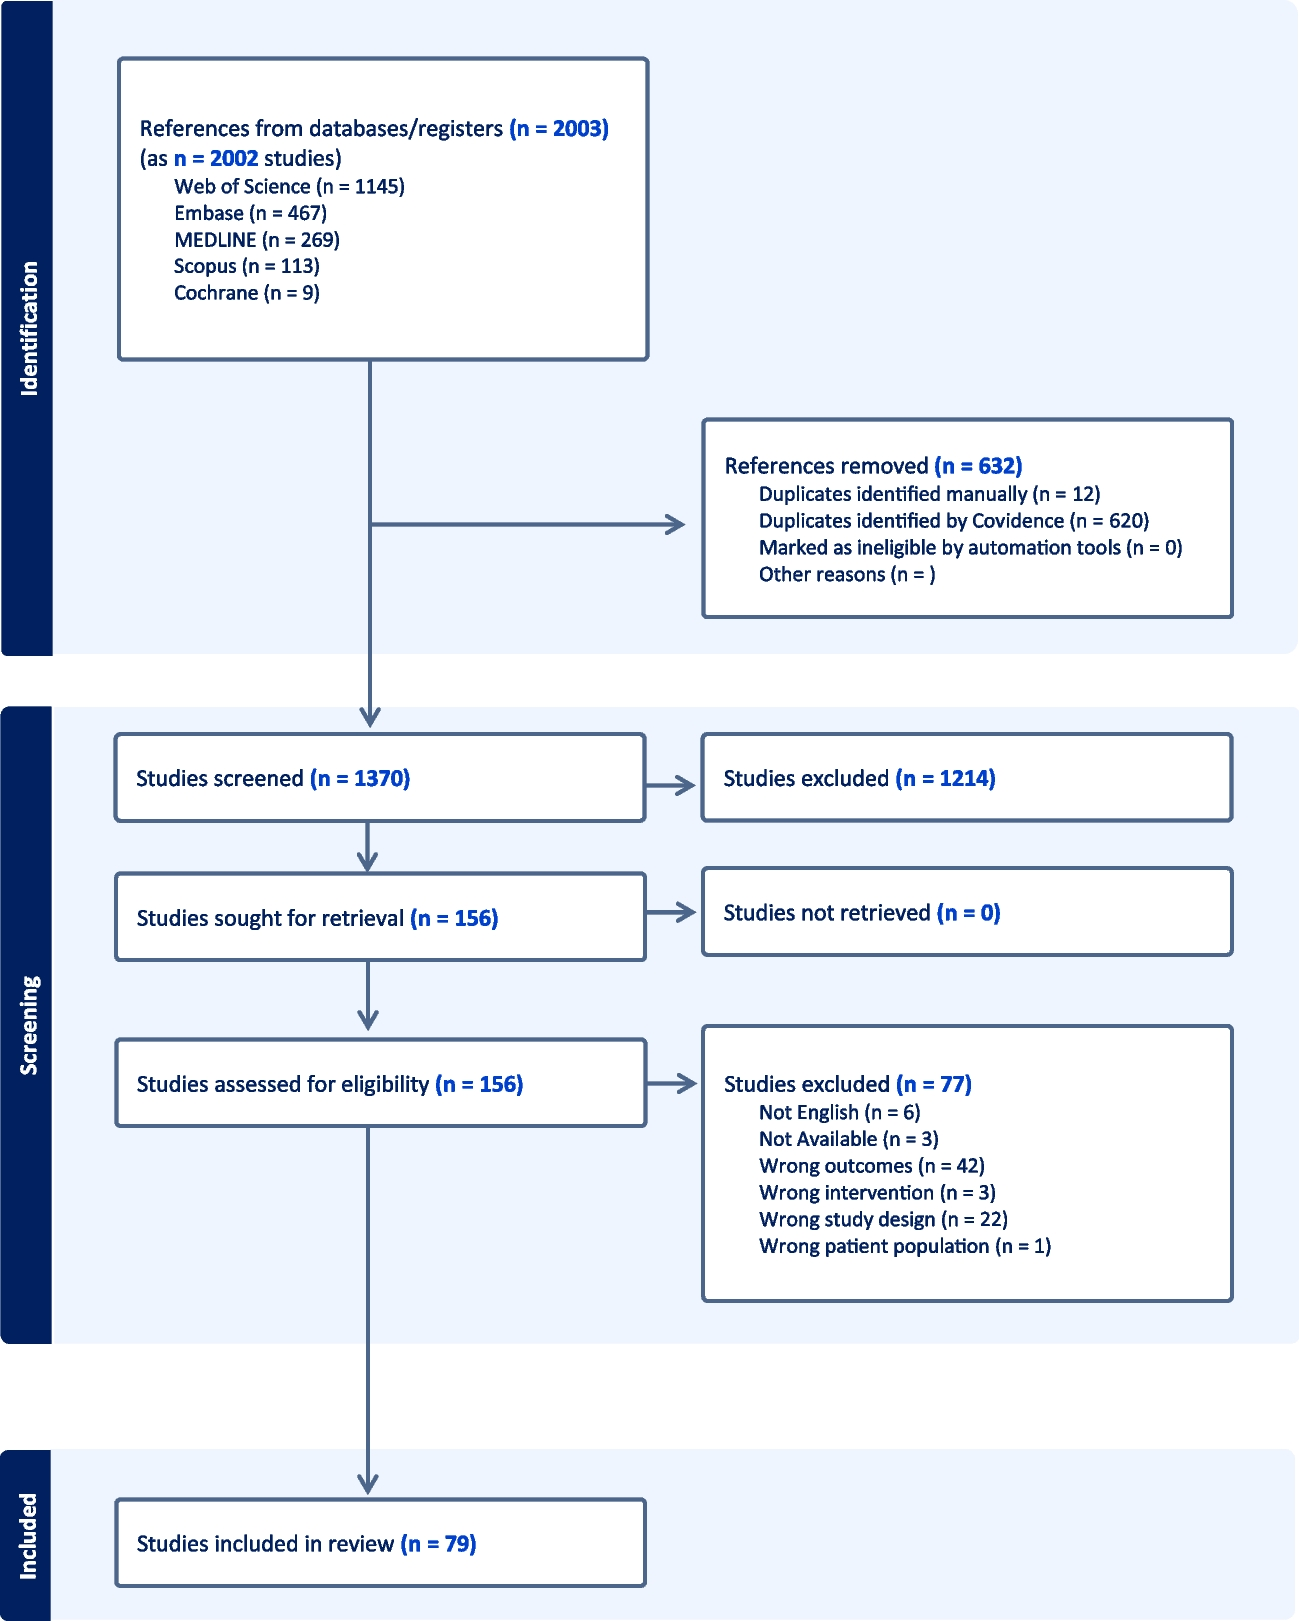 Complications and side effects of Wide-Awake Local Anaesthesia No Tourniquet (WALANT) in upper limb surgery: a systematic review and meta-analysis